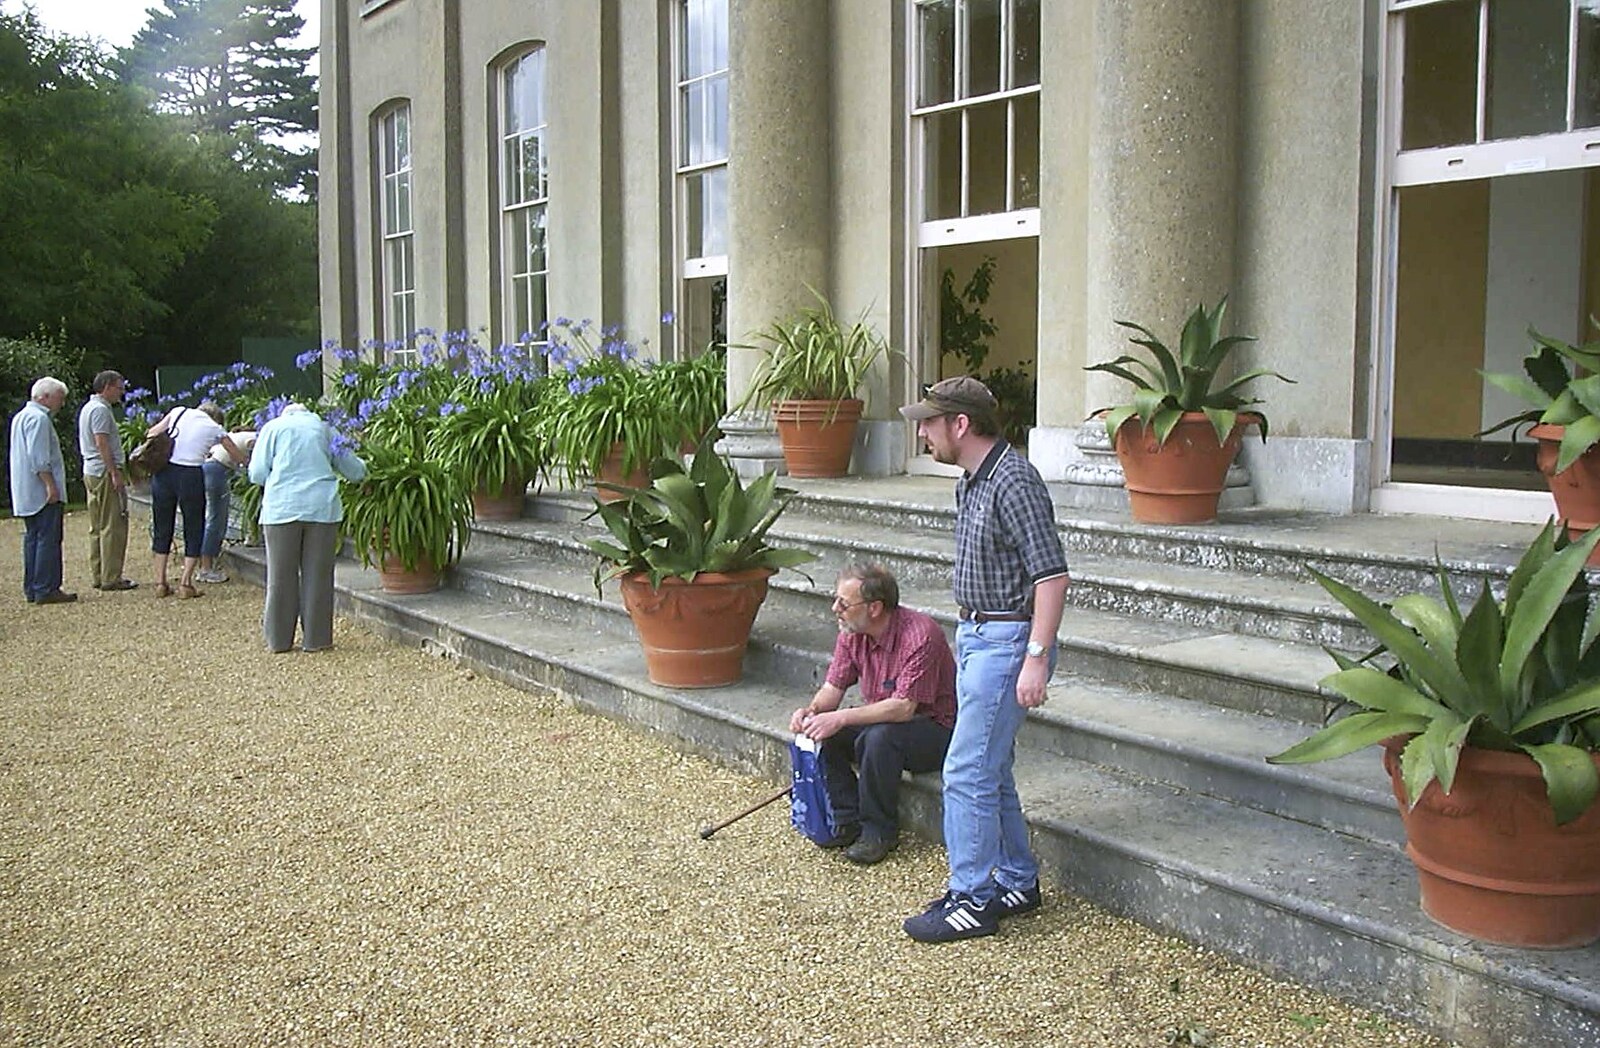 Sitting on the steps outside the Orangery from A Trip to Ickworth House, Horringer, Suffolk - 22nd August 2004